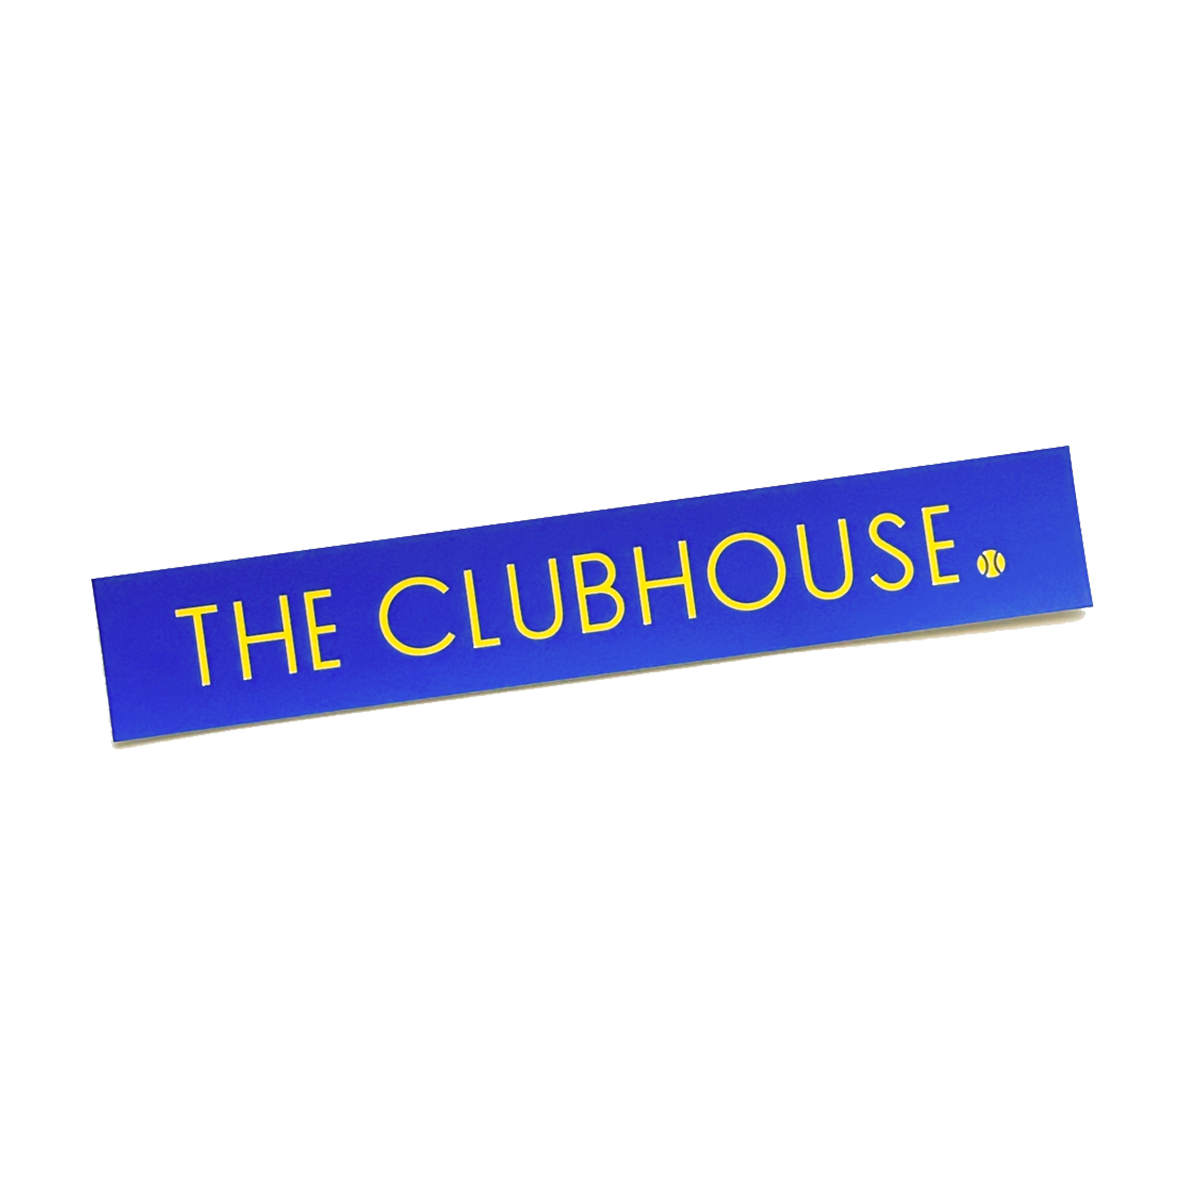 THE CLUBHOUSE logo sticker (US Open version)